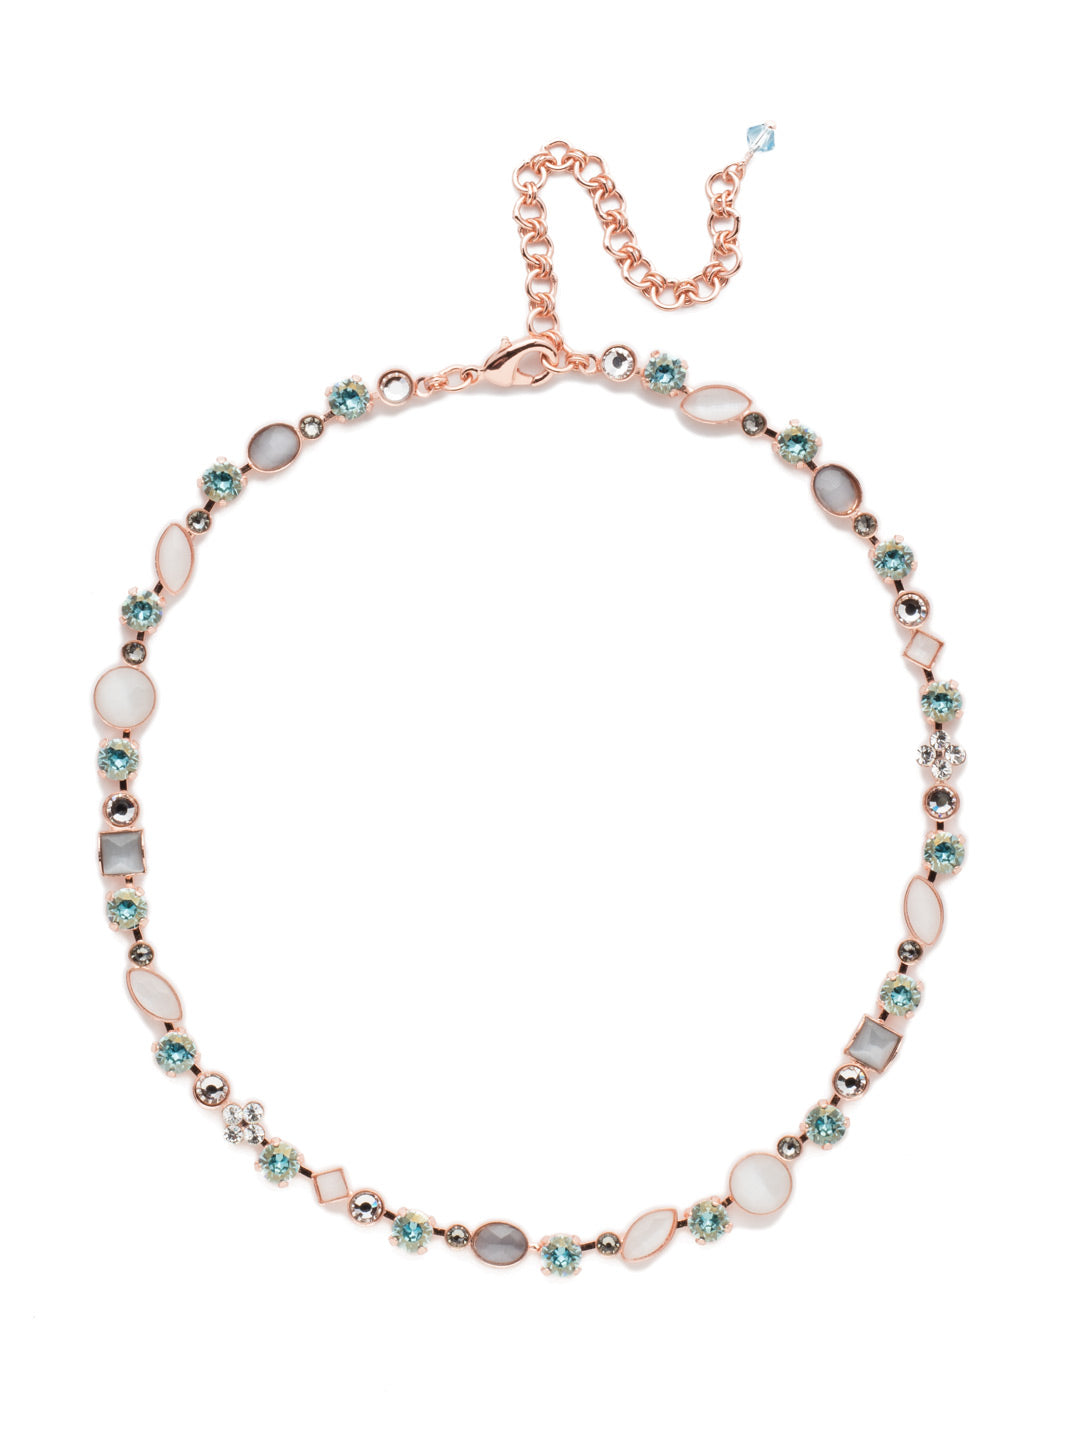 Classic Tee-Shirt Tennis Necklace - NAQ3RGCAZ - Can't find anything to pair with your favorite tee? Look no further! Our Classic Tee-Shirt Necklace features multi-cut crystal and cabochon stones to give you the perfect casual sparkle. From Sorrelli's Crystal Azure collection in our Rose Gold-tone finish.